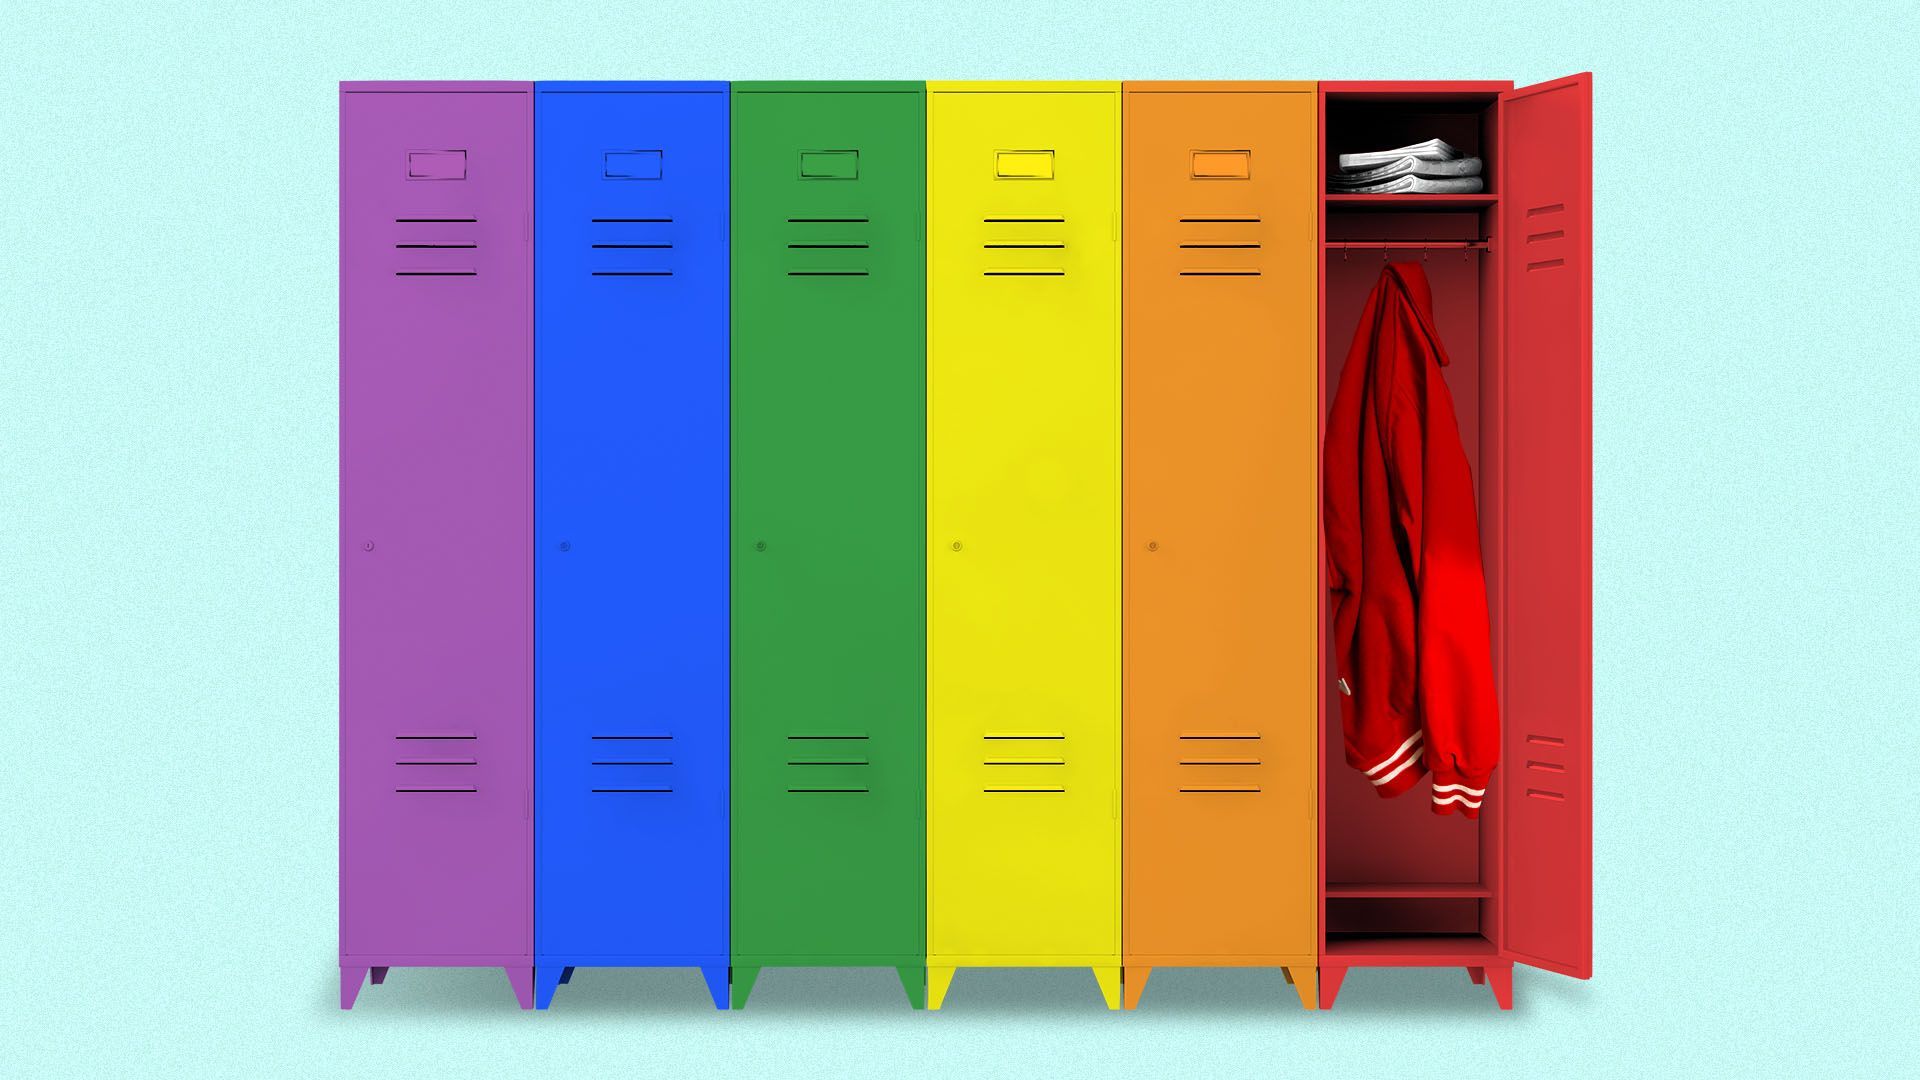 Illustration of a set of lockers with the colors of the rainbow flag